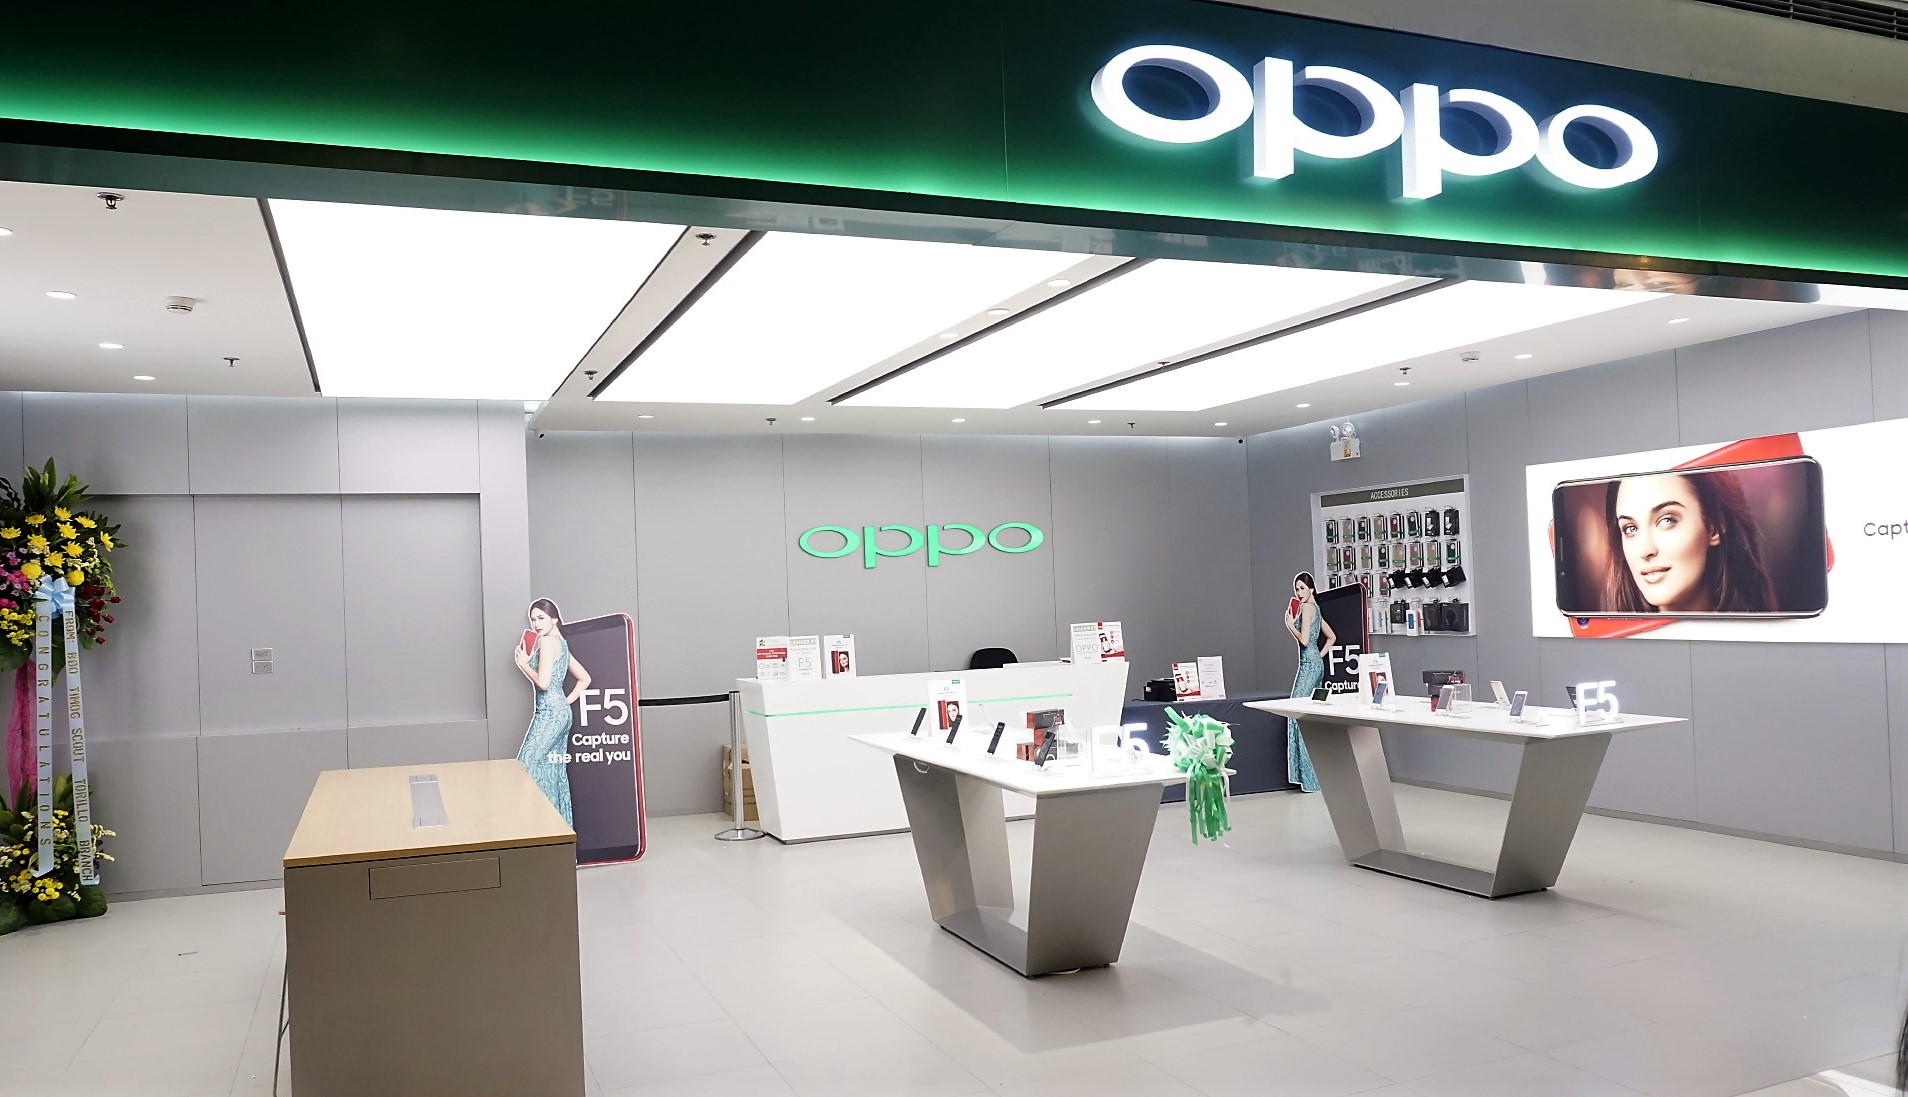 Oppo silently launches Oppo A1K at INR 8,490/- with Helio P22 SoC